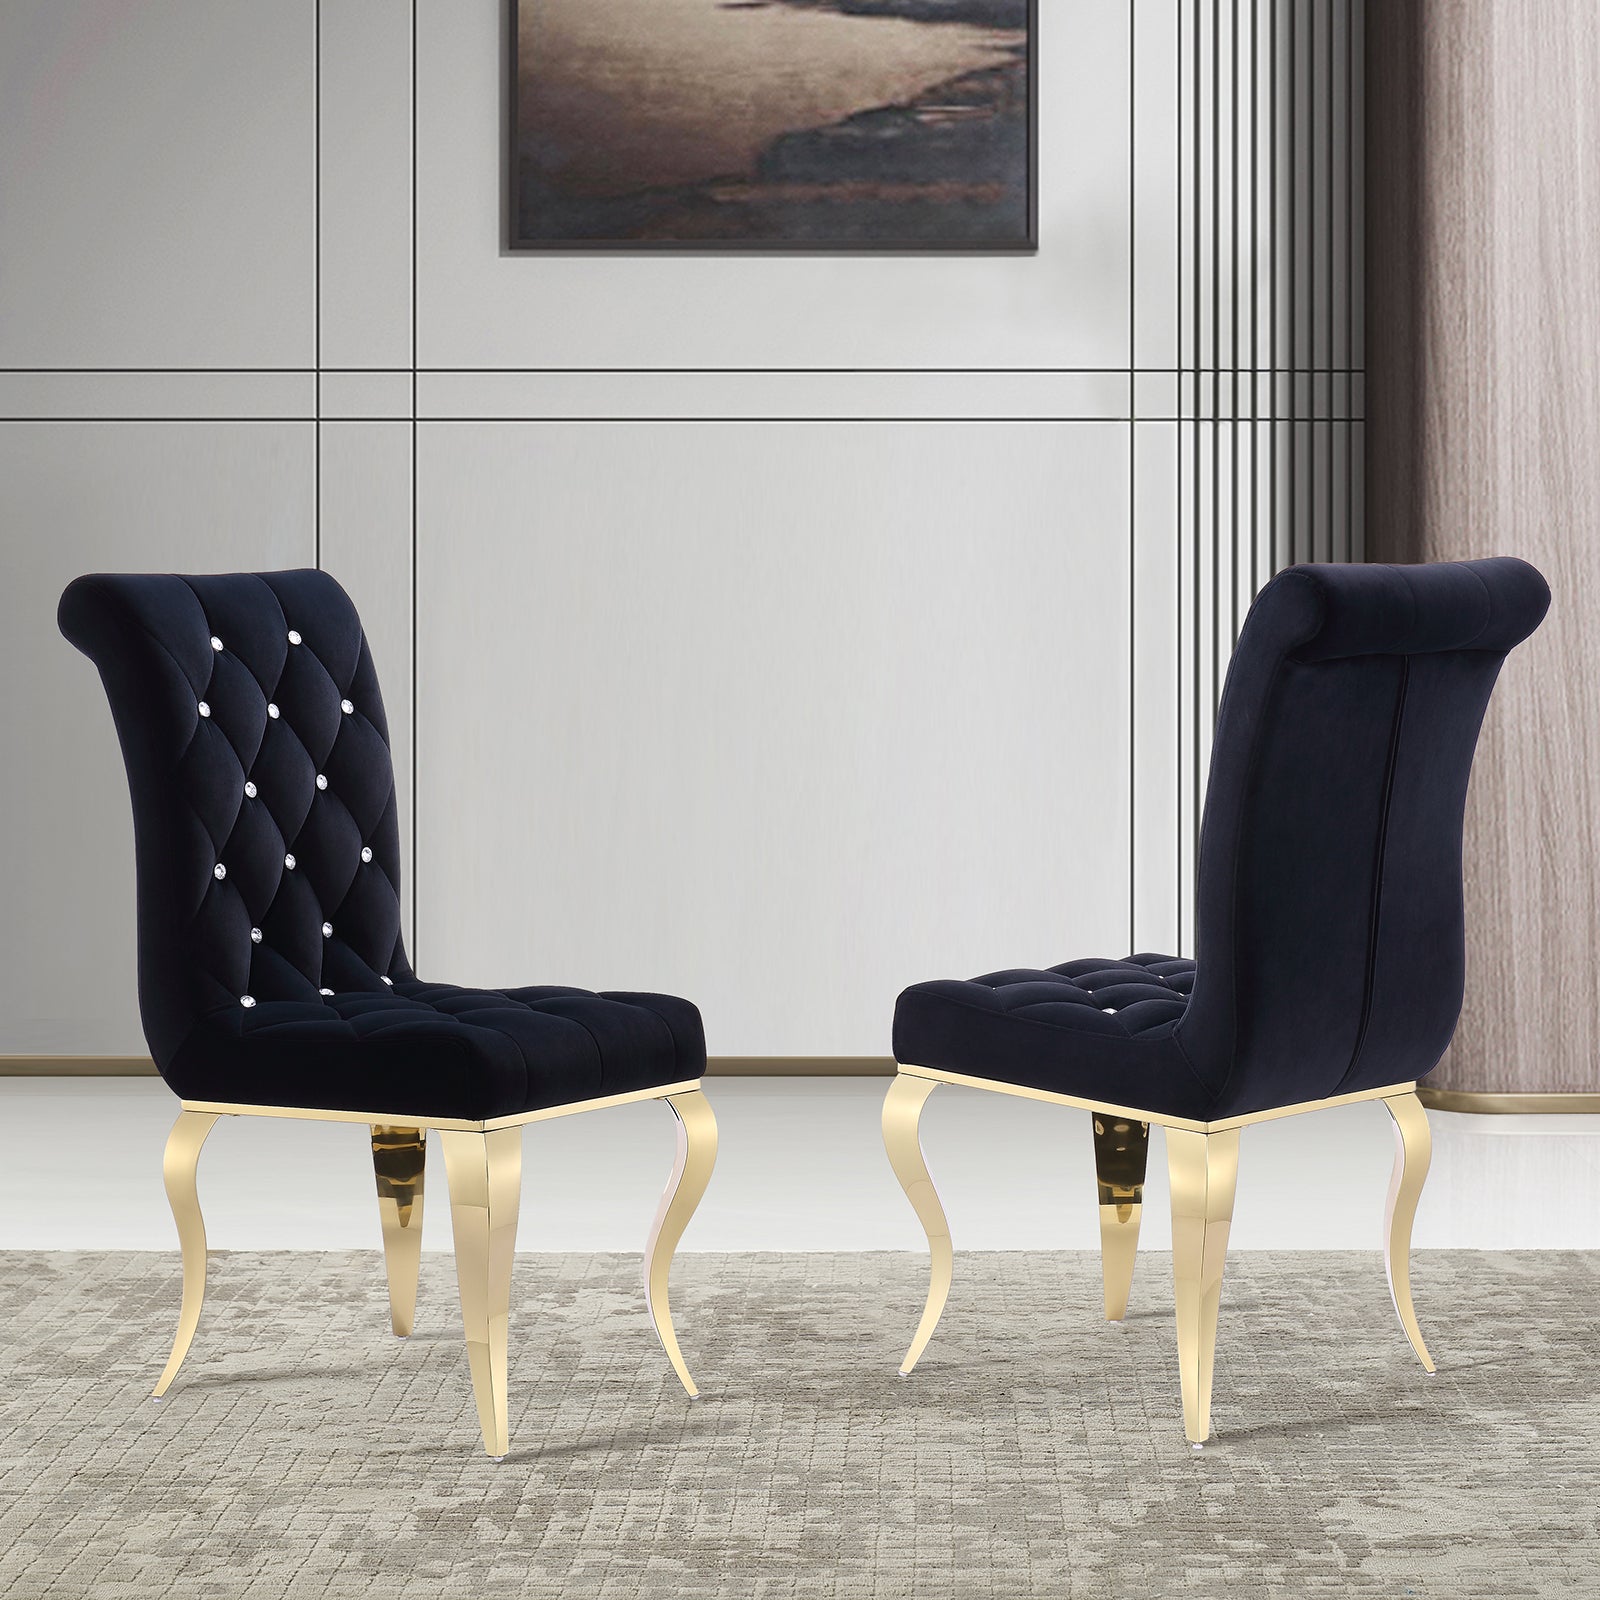 Add Elegance to Your Dining Space with Black Velvet Upholstered Chairs